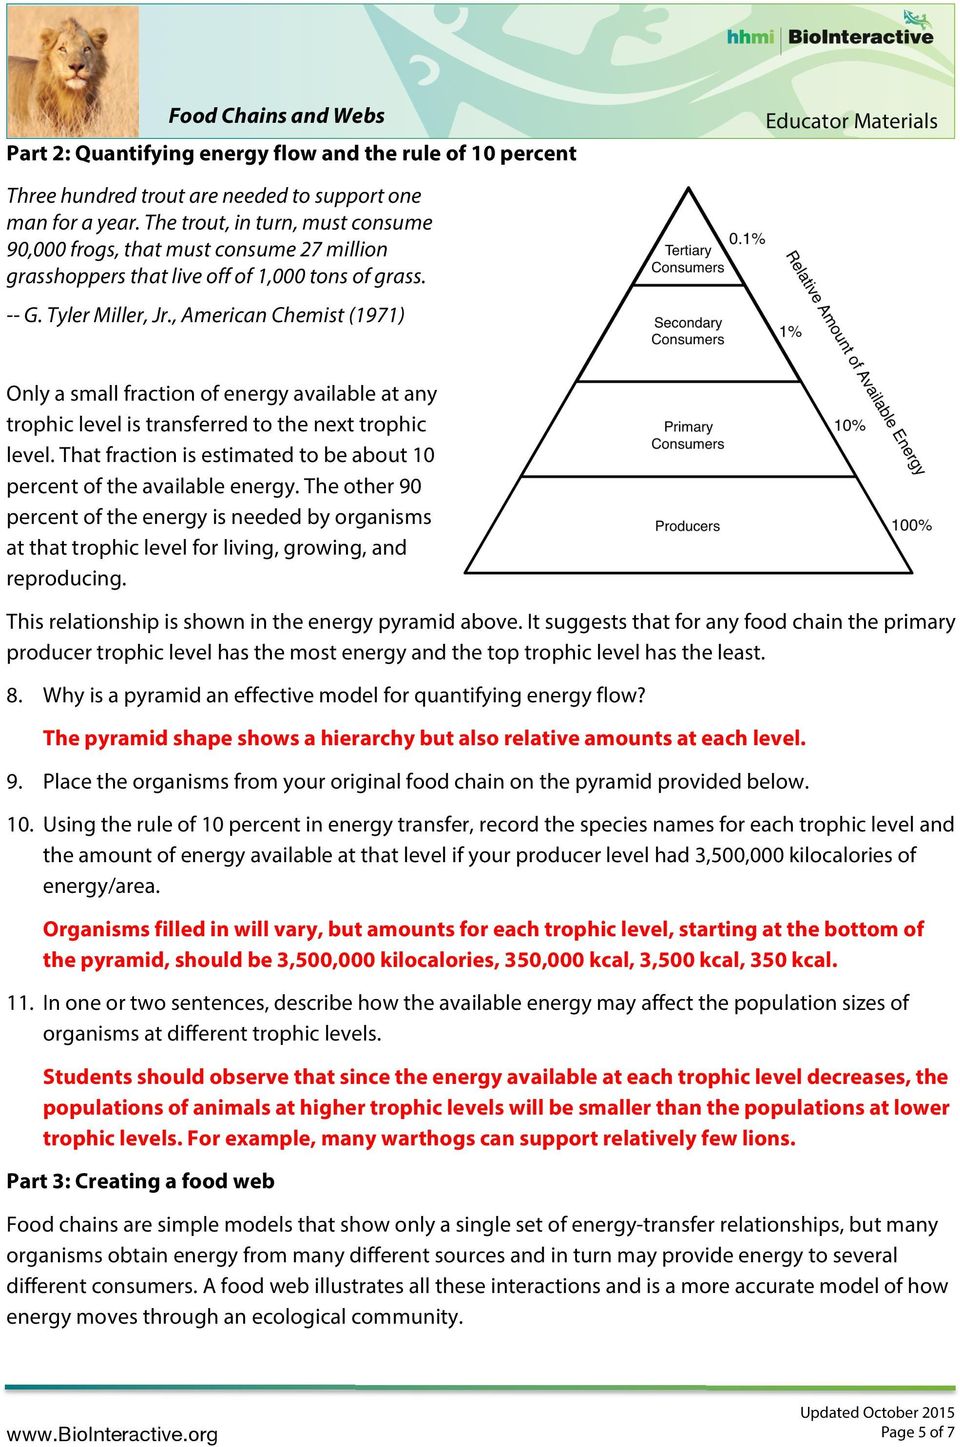 Creating Chains and Webs to Model Ecological Relationships - PDF Pertaining To Ecological Pyramids Worksheet Answer Key